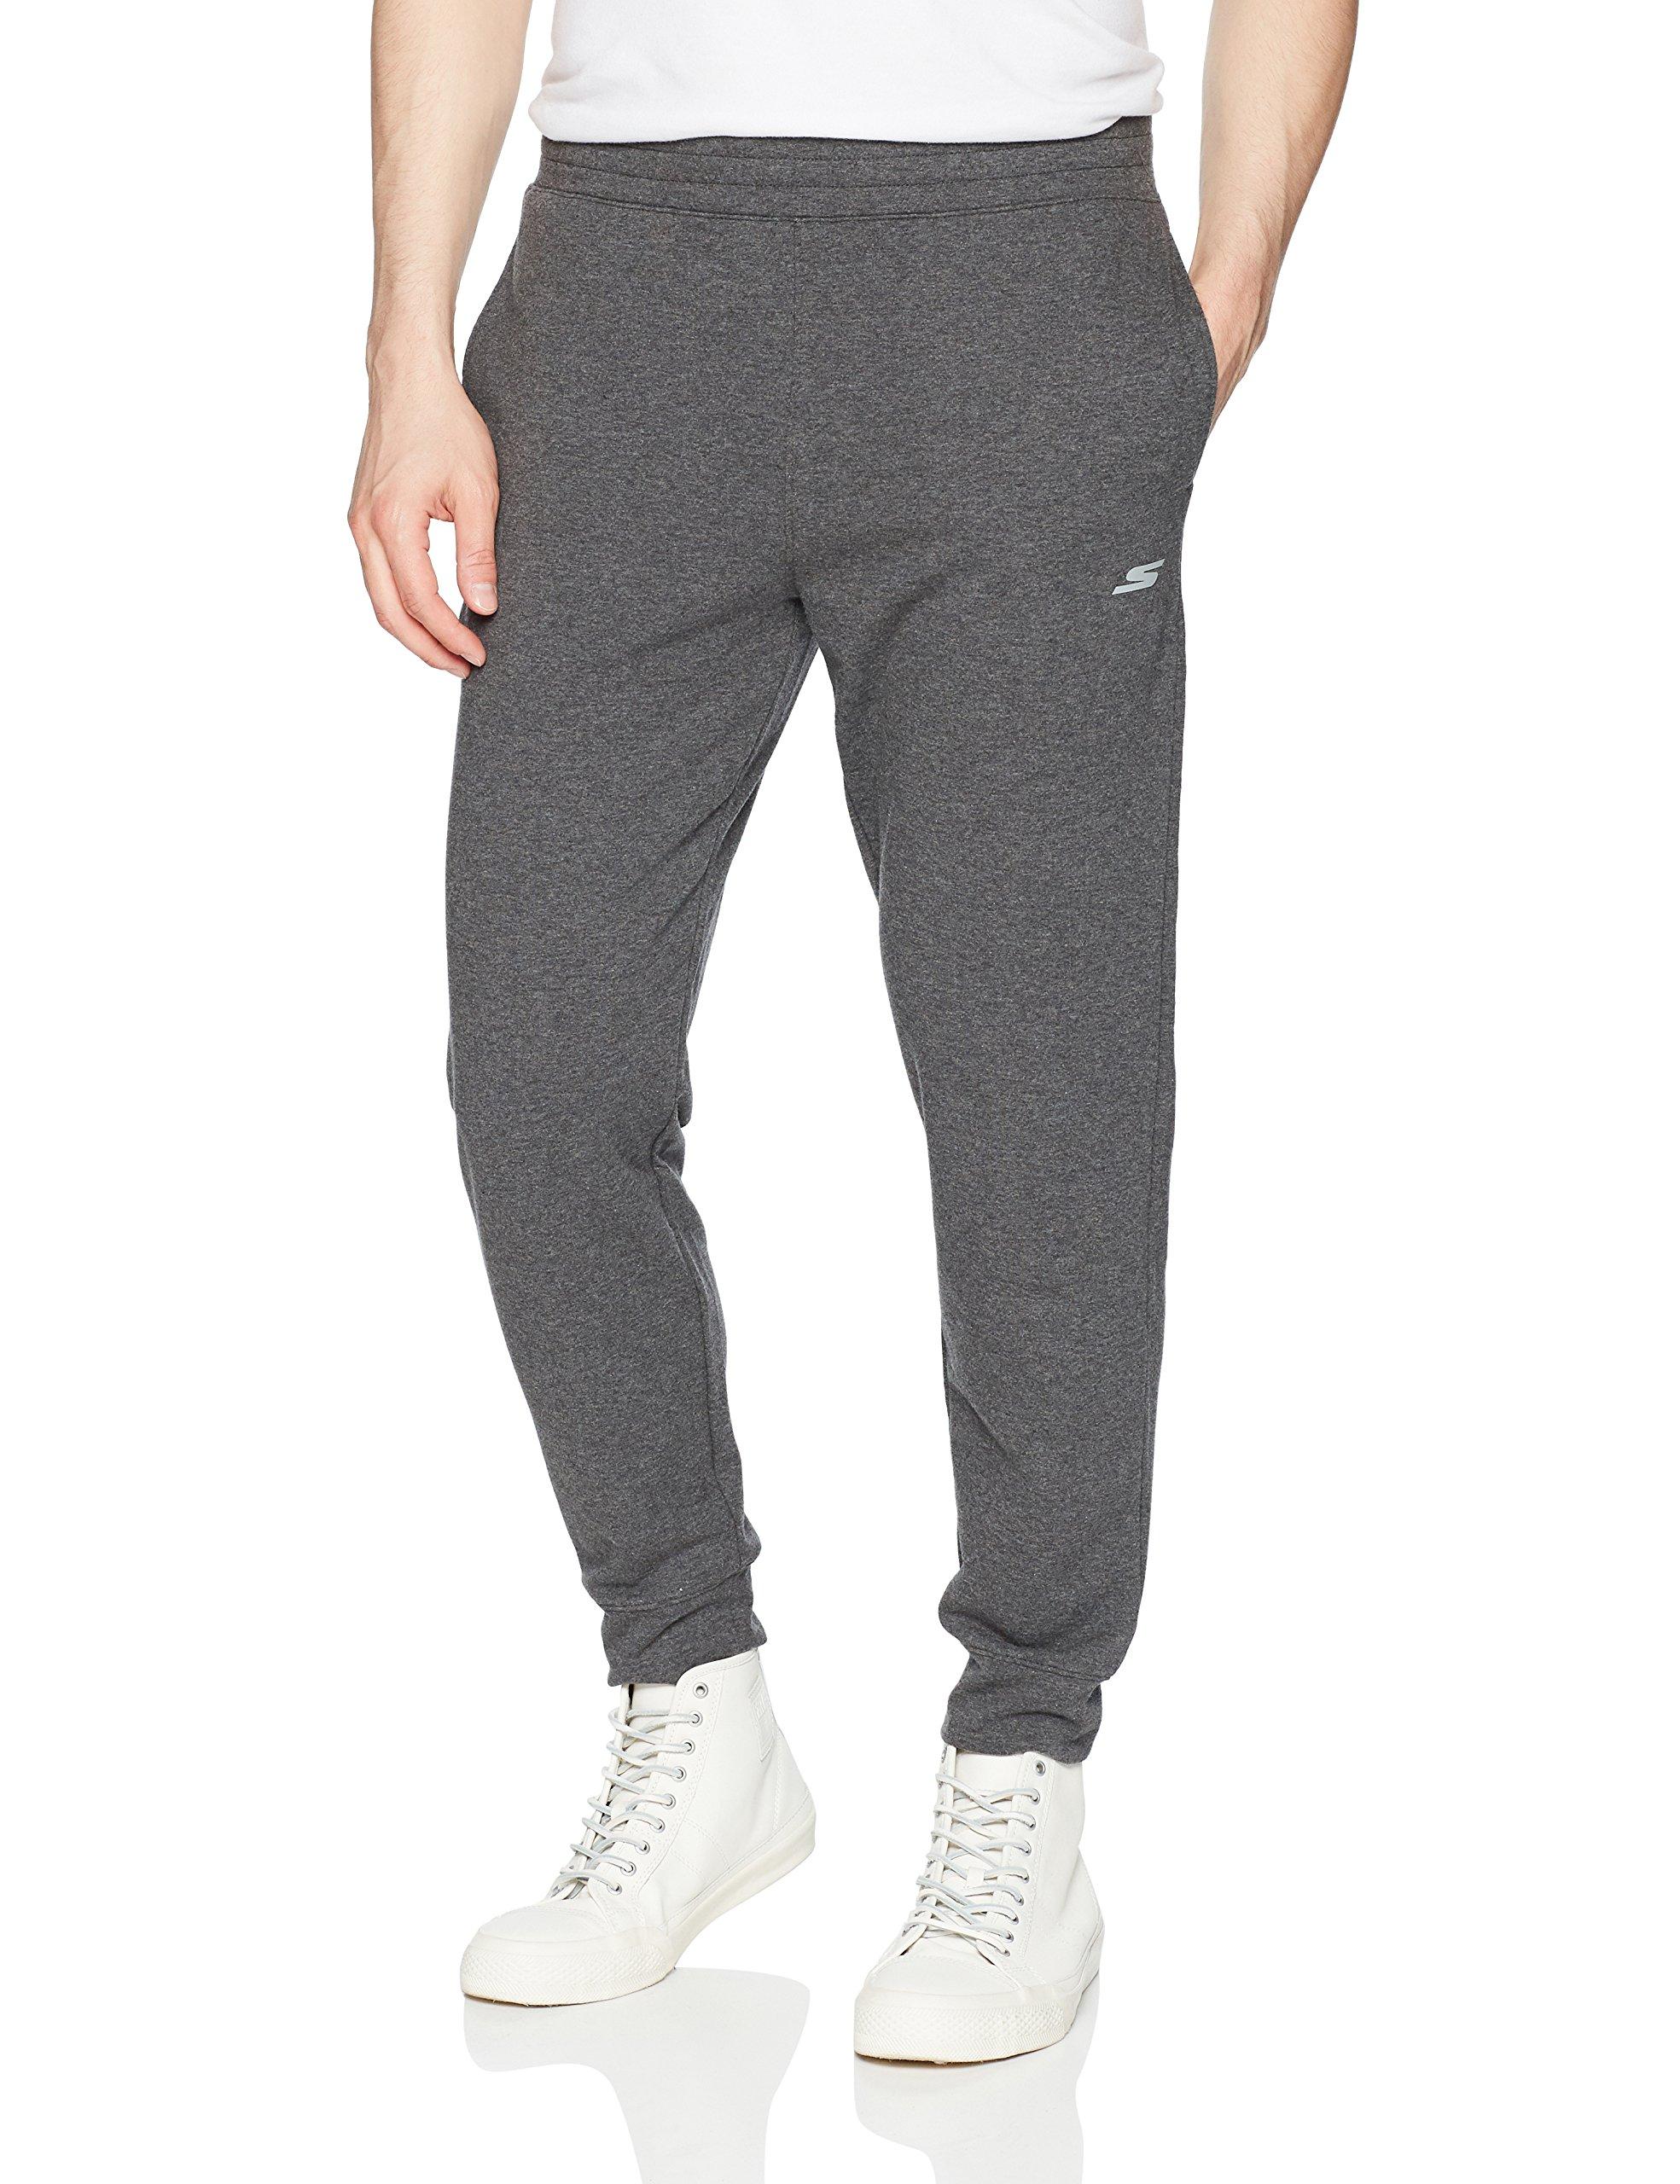 Skechers Go Train Rep Jogger Workout Sweatpants, Charcoal, Large in ...